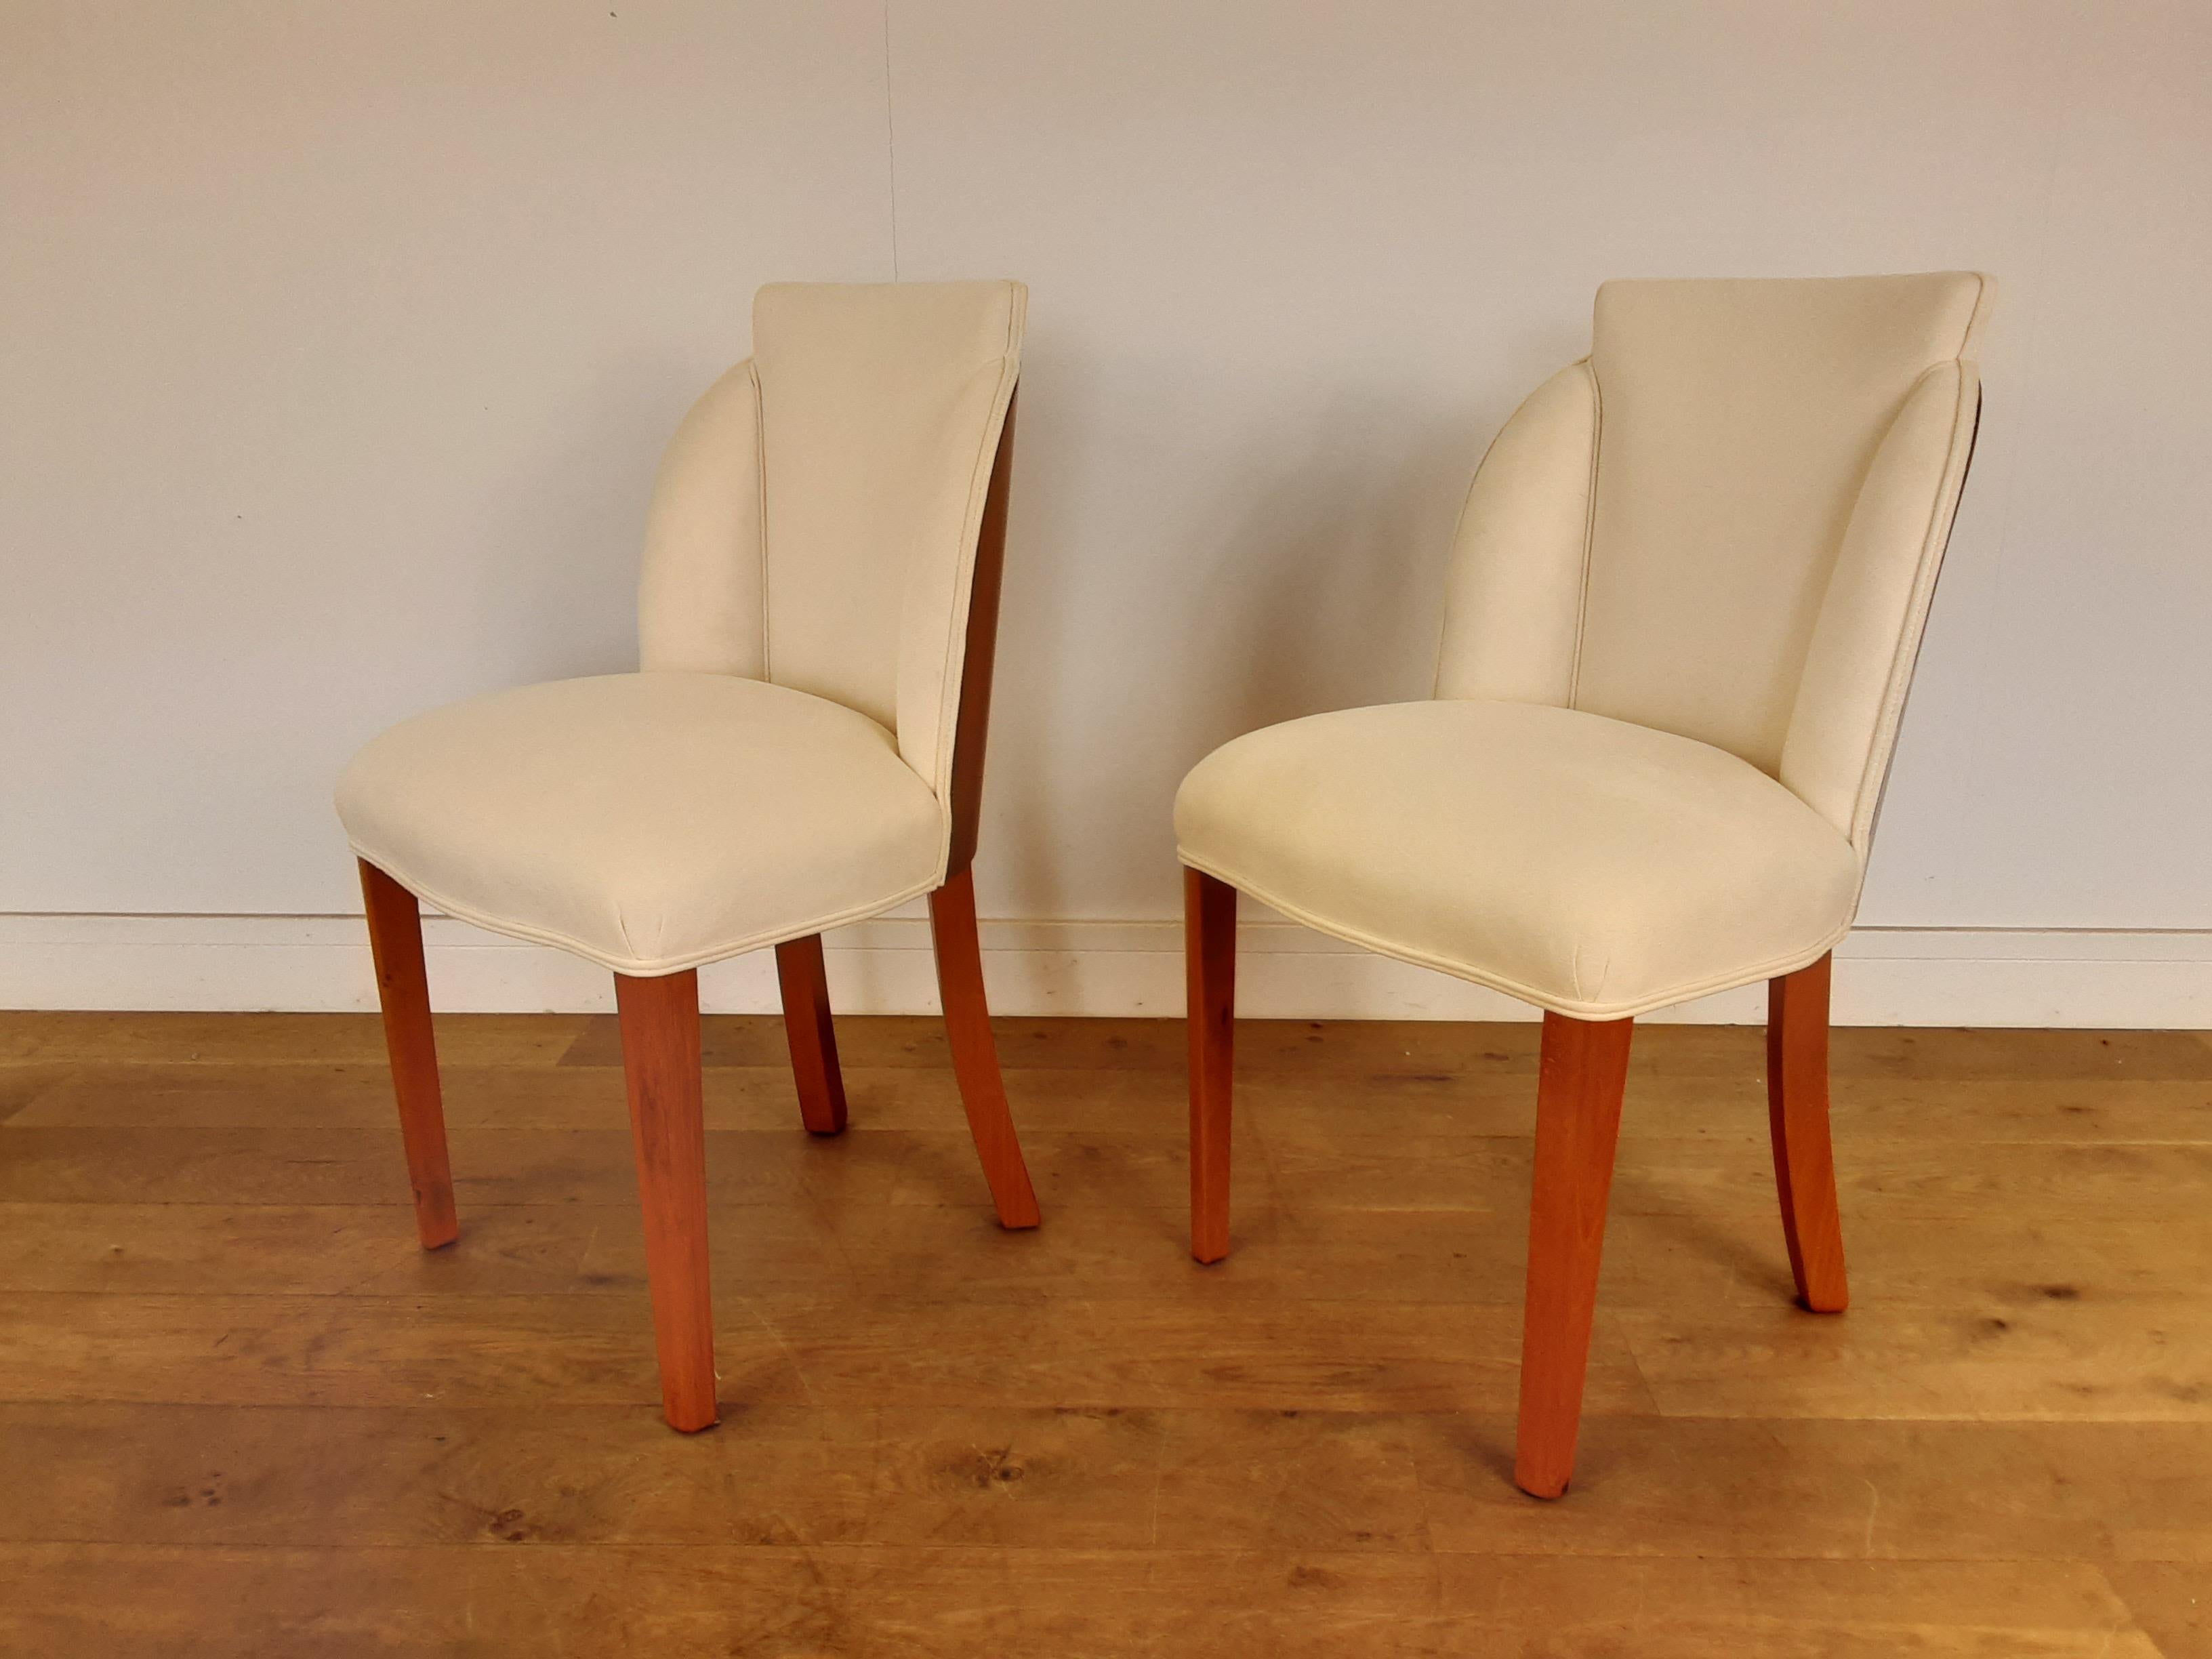 Pair of Art Deco Cloud Back Chairs in Walnut by Epstein, circa 1930 For Sale 6